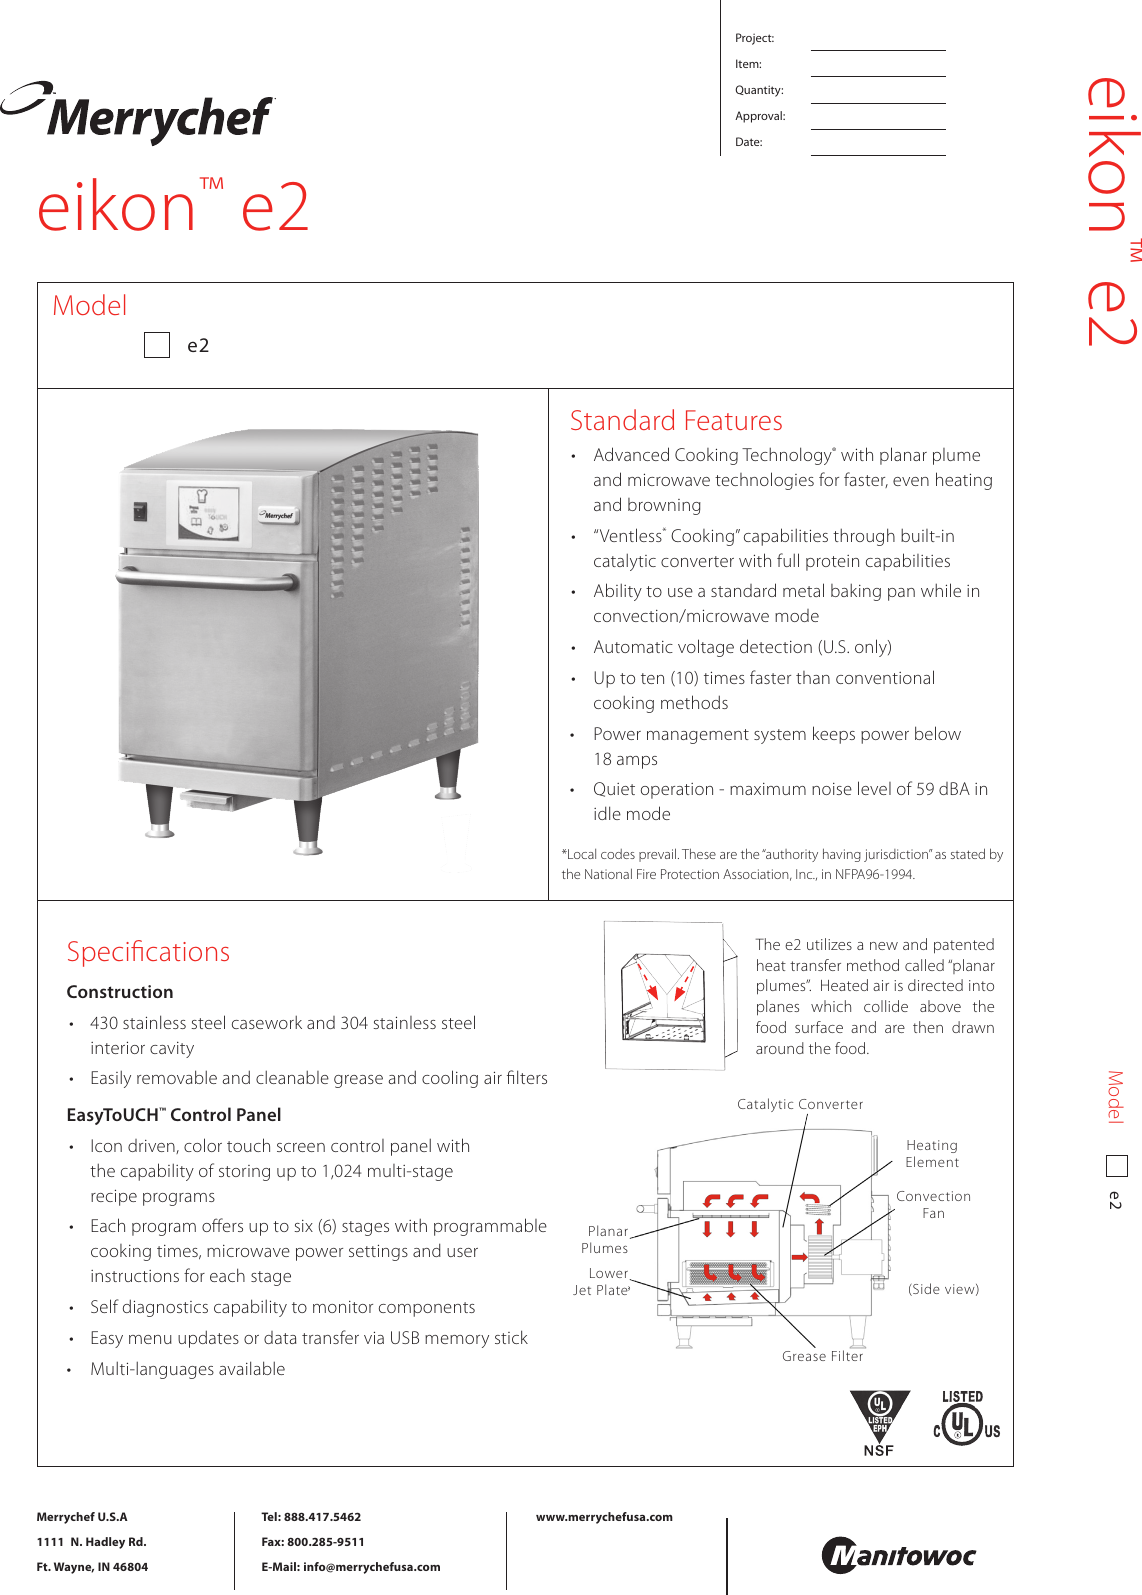 Page 1 of 2 - Merrychef Eikon E2 Spec-UL Approved_pg_2  Merrychef-eikon-e2-rapid-cook-oven